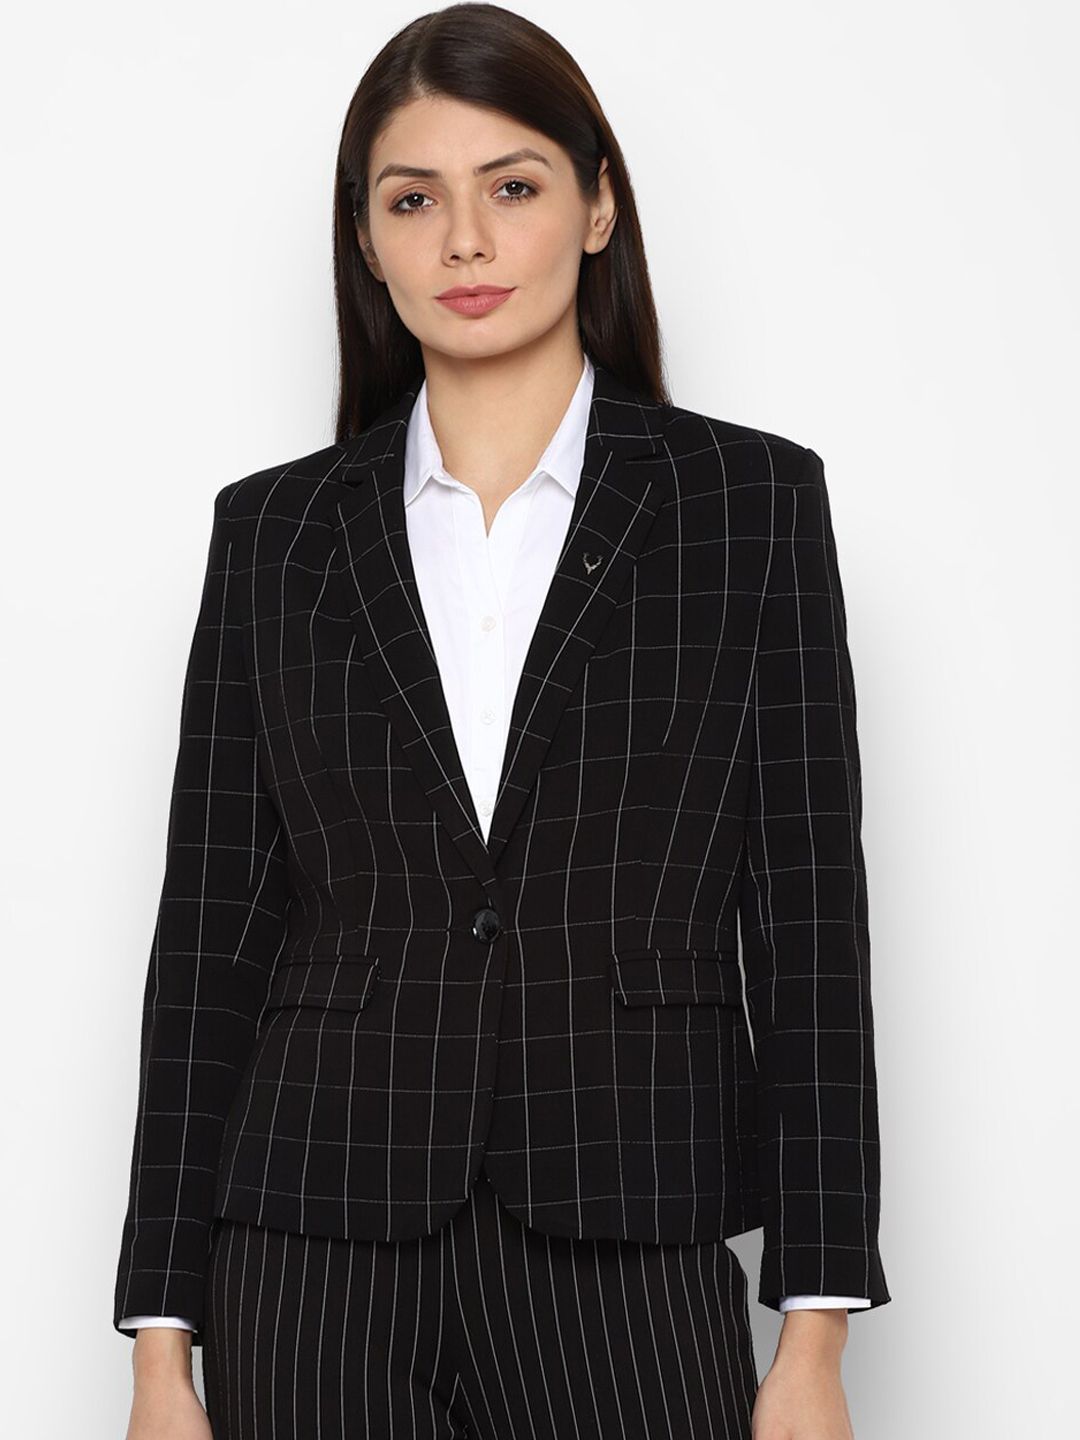 Allen Solly Woman Black Checked Single-Breasted Formal Blazer Price in India